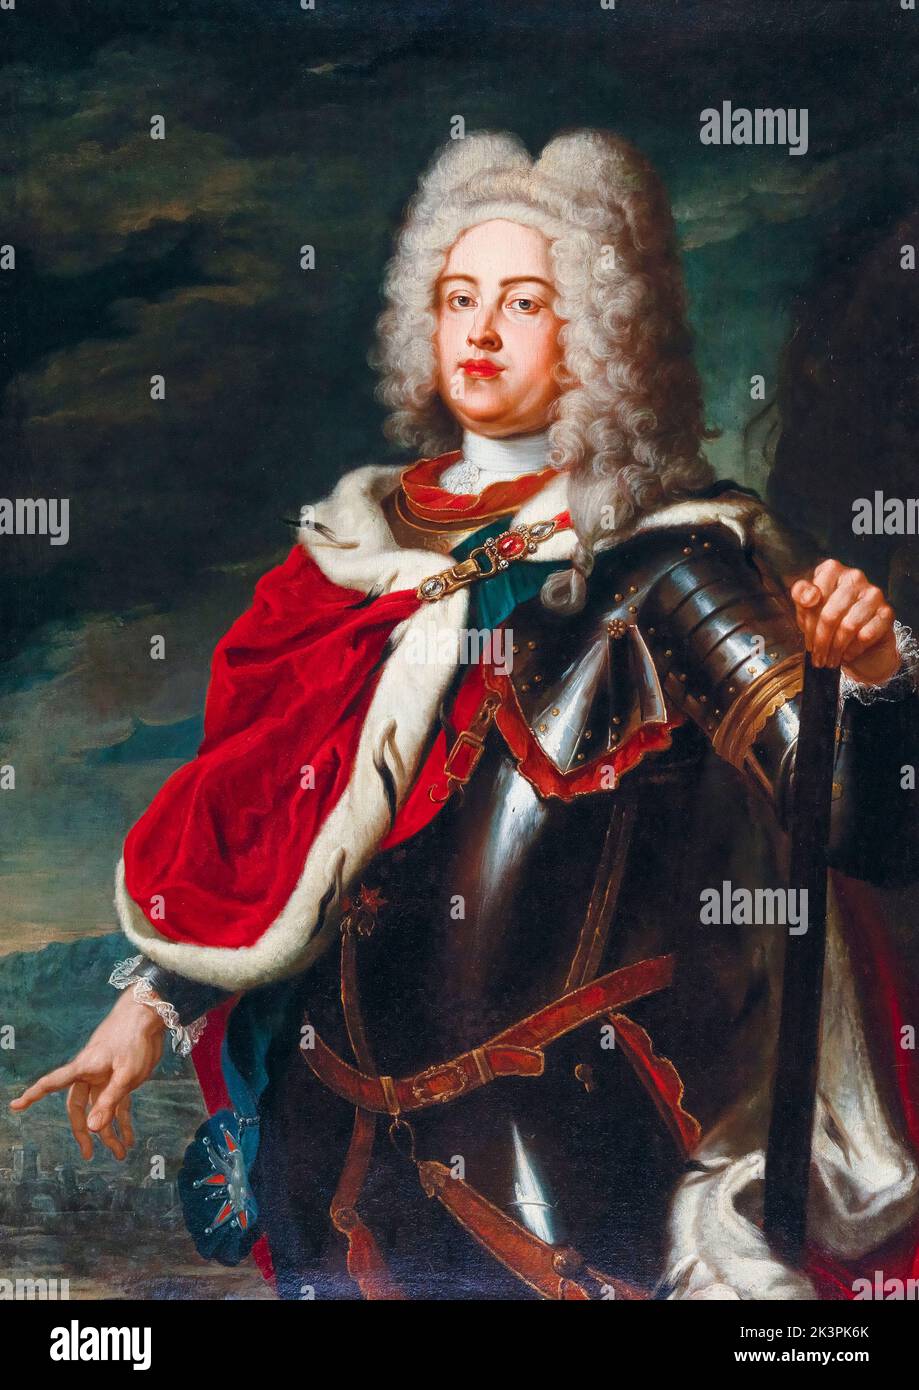 Frederick August II (1696-1763) Elector of Saxony and King of Poland (1733-1763), portrait painting in oil on canvas by Ádám Mányoki, 1722-1726 Stock Photo